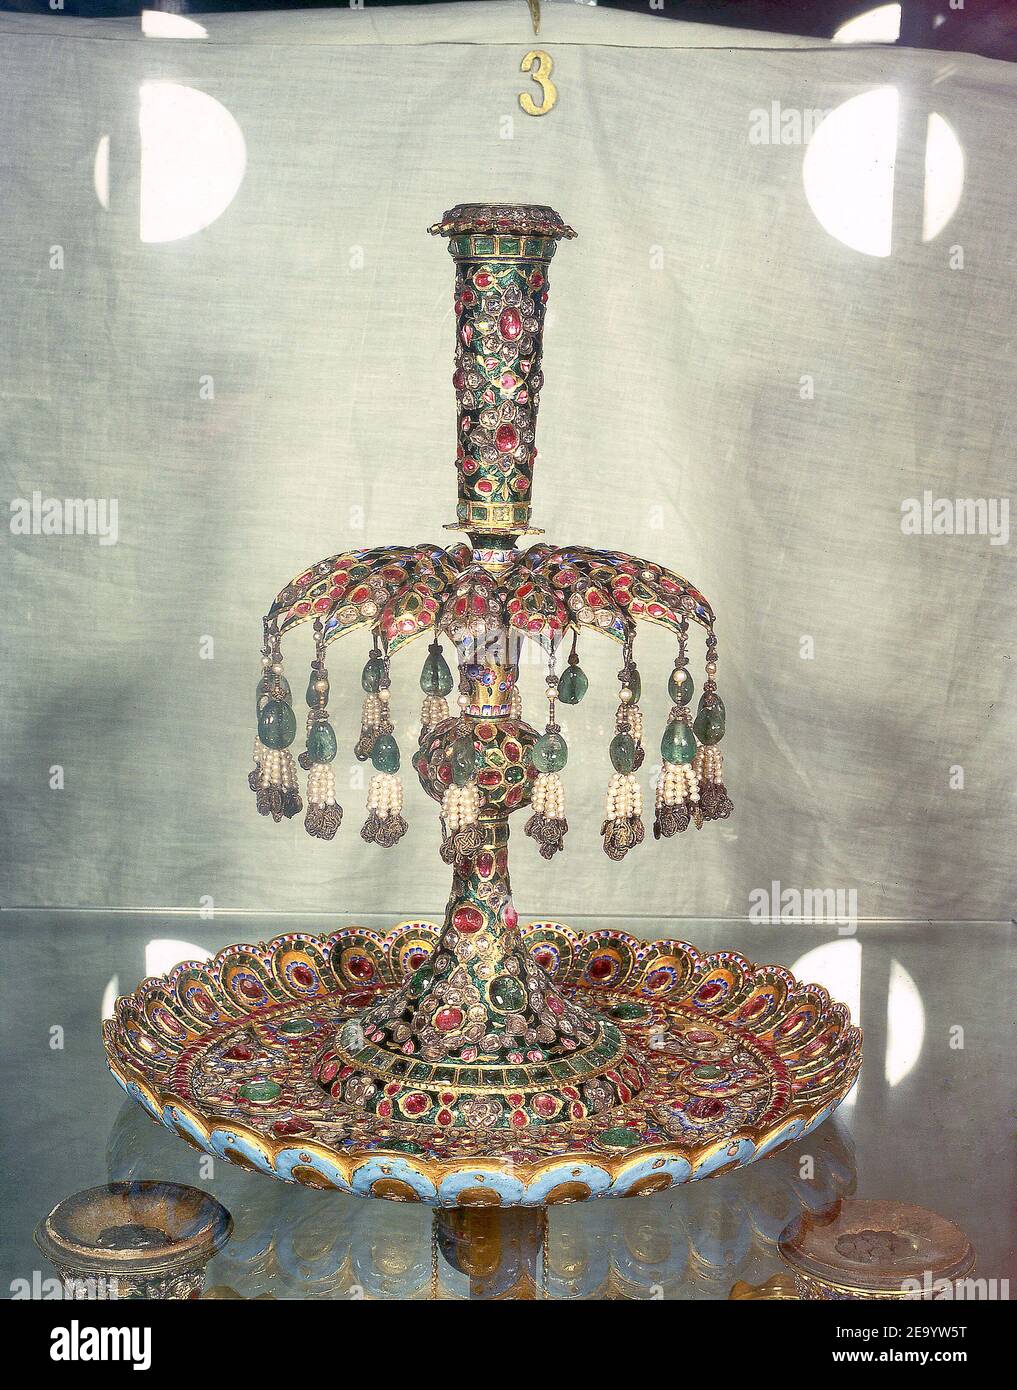 EXCLUSIVE. A piece of the Iranian Crown which belongs today to the Museum of Iranian Crown Jewels located in the basements of the Melli Bank in Tehran, Iran. Photo by Alexis Orand/ABACA. Stock Photo